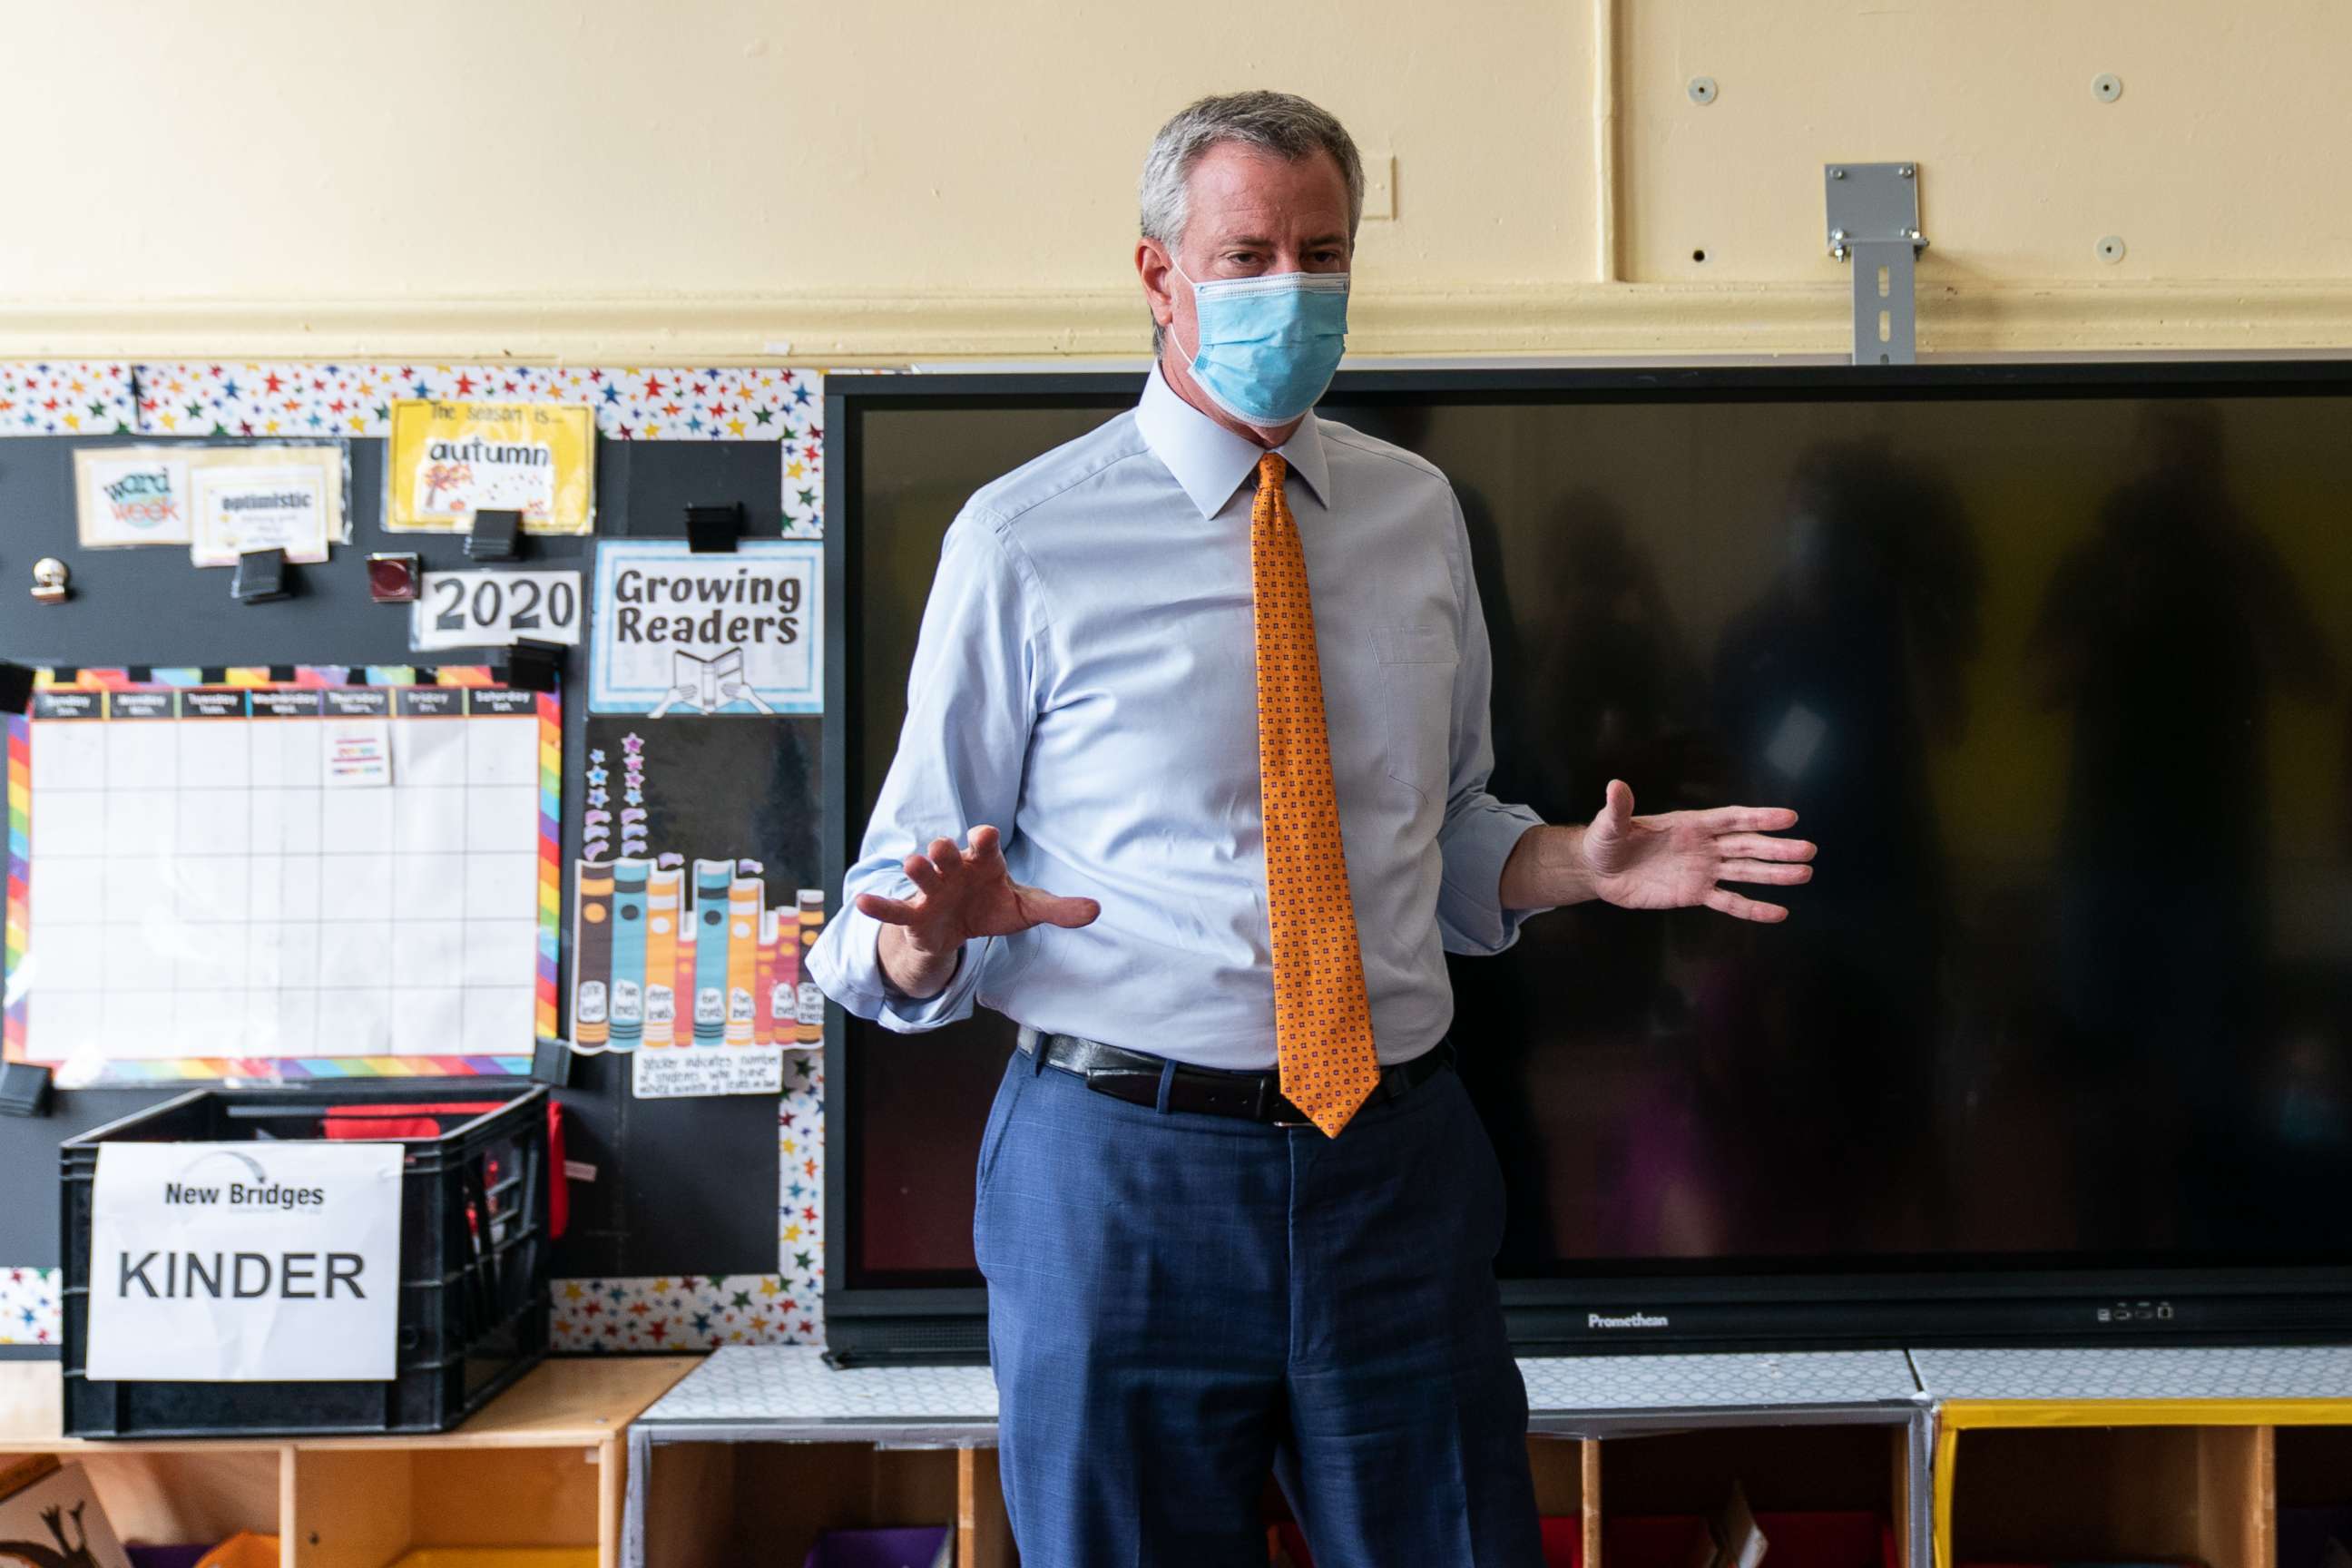 PHOTO: New York Mayor Bill de Blasio speaks during a news conference at New Bridges Elementary School in the Brooklyn borough of New York, Aug. 19, 2020.